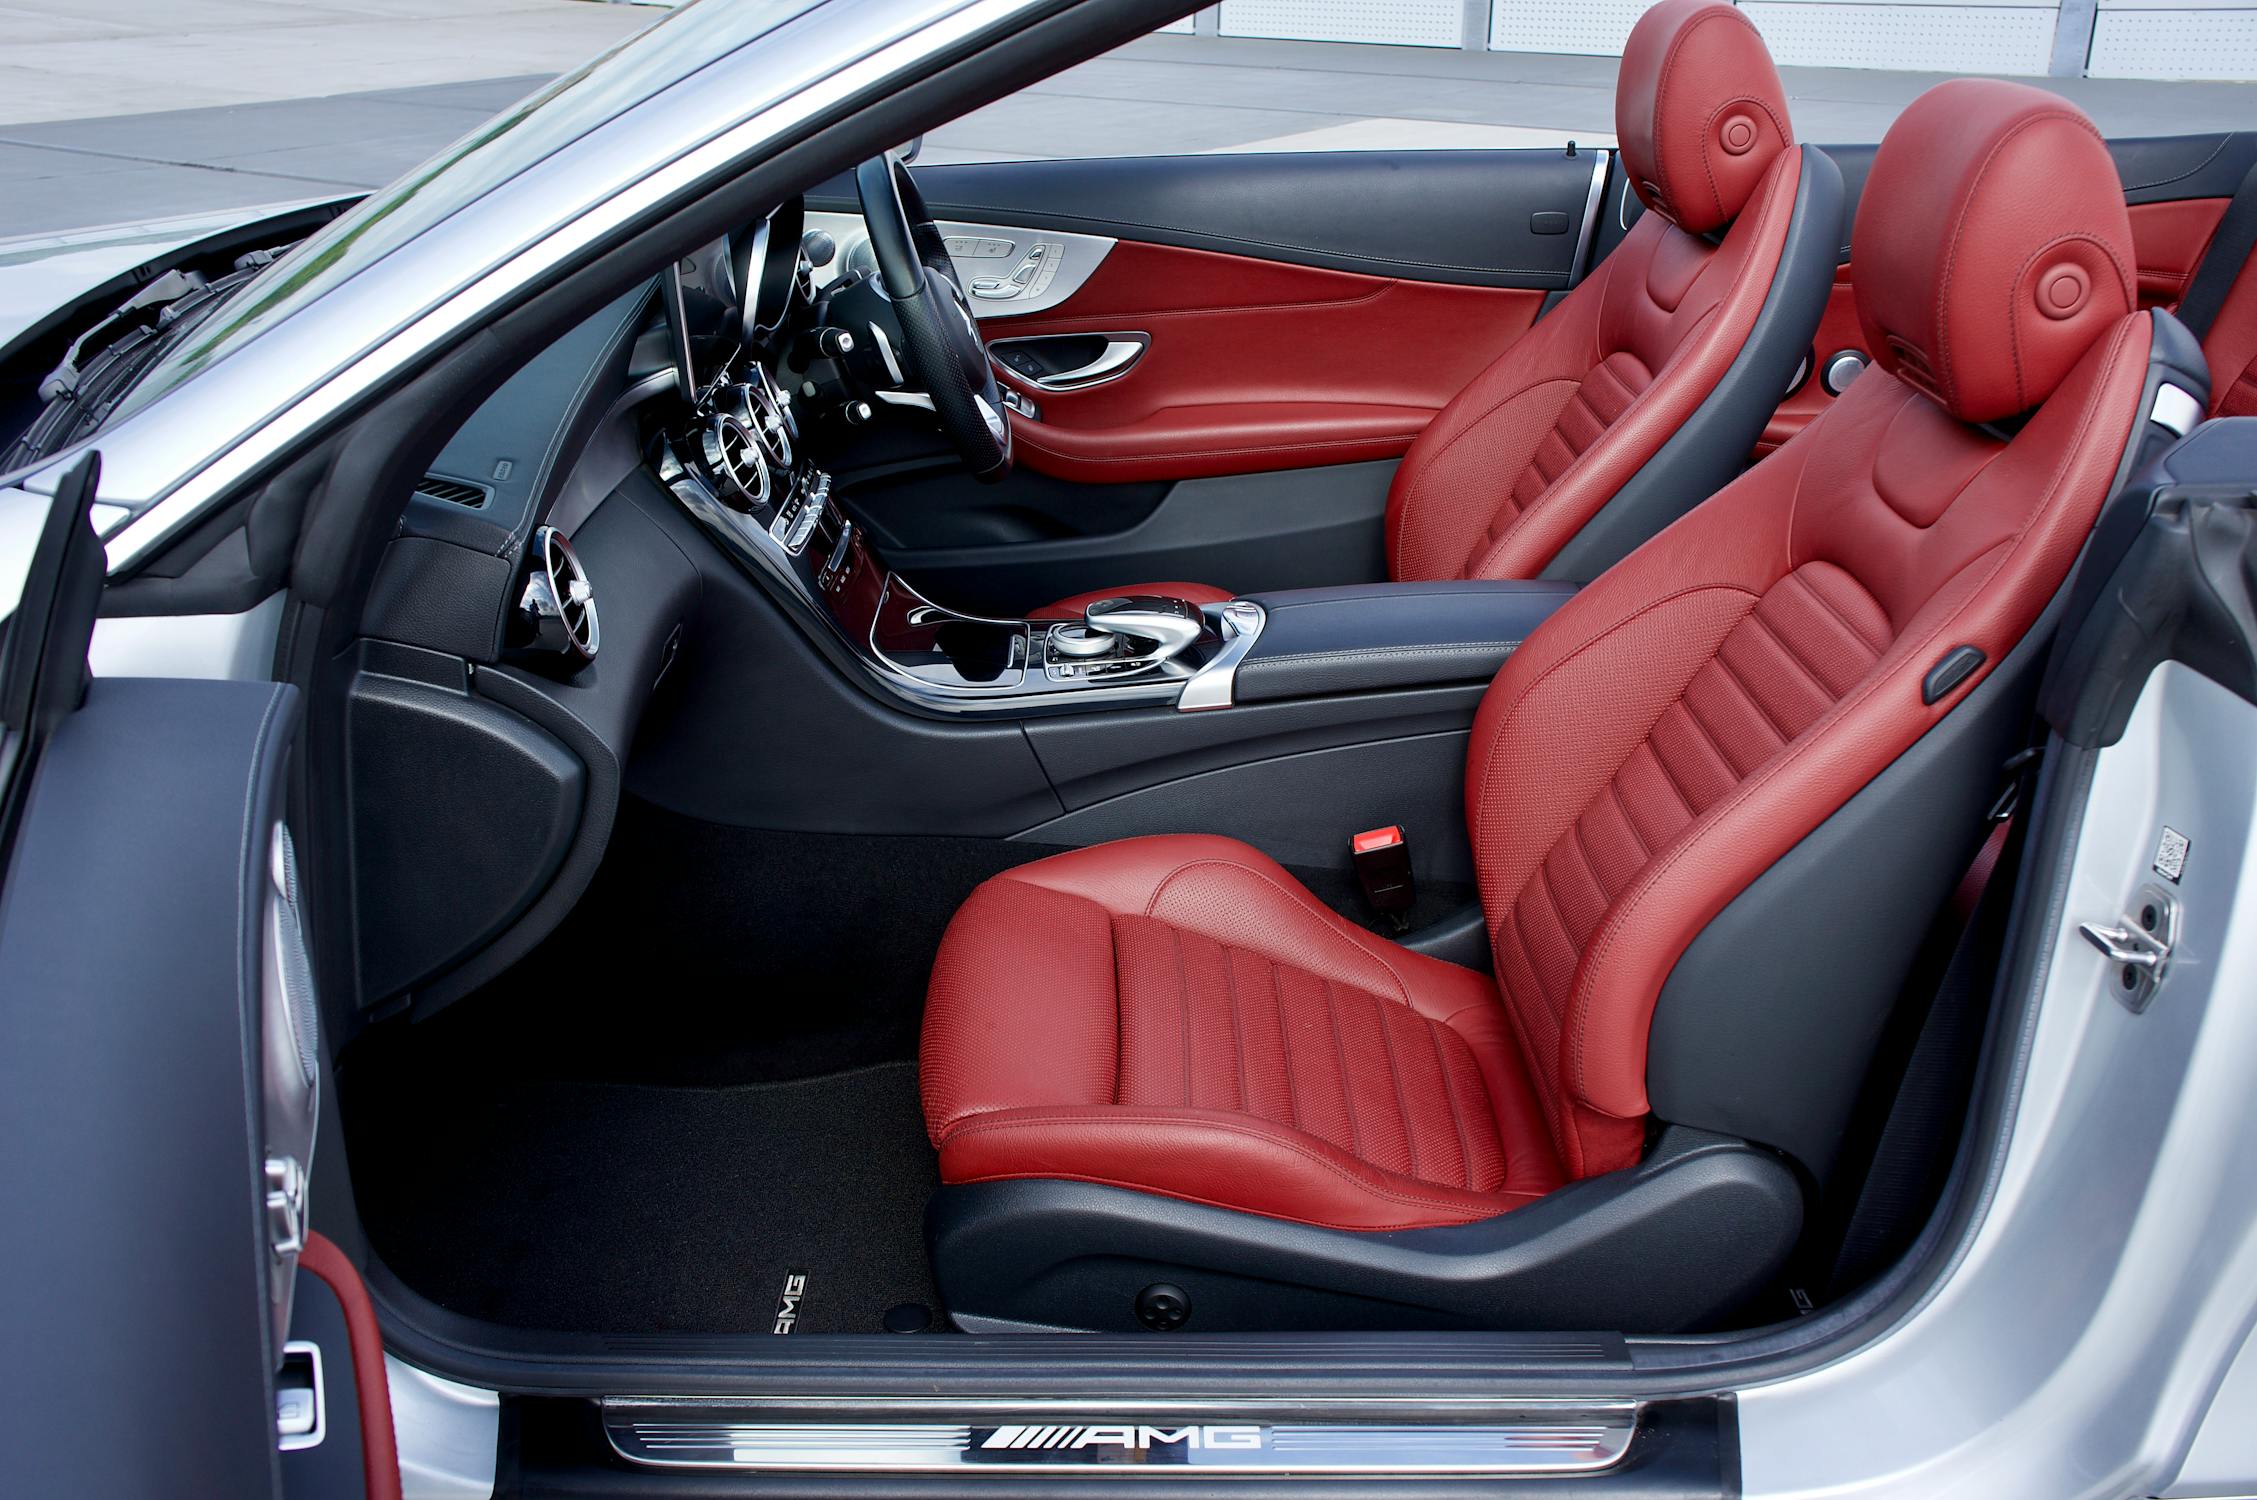 Red and Black Car Interior · Free Stock Photo